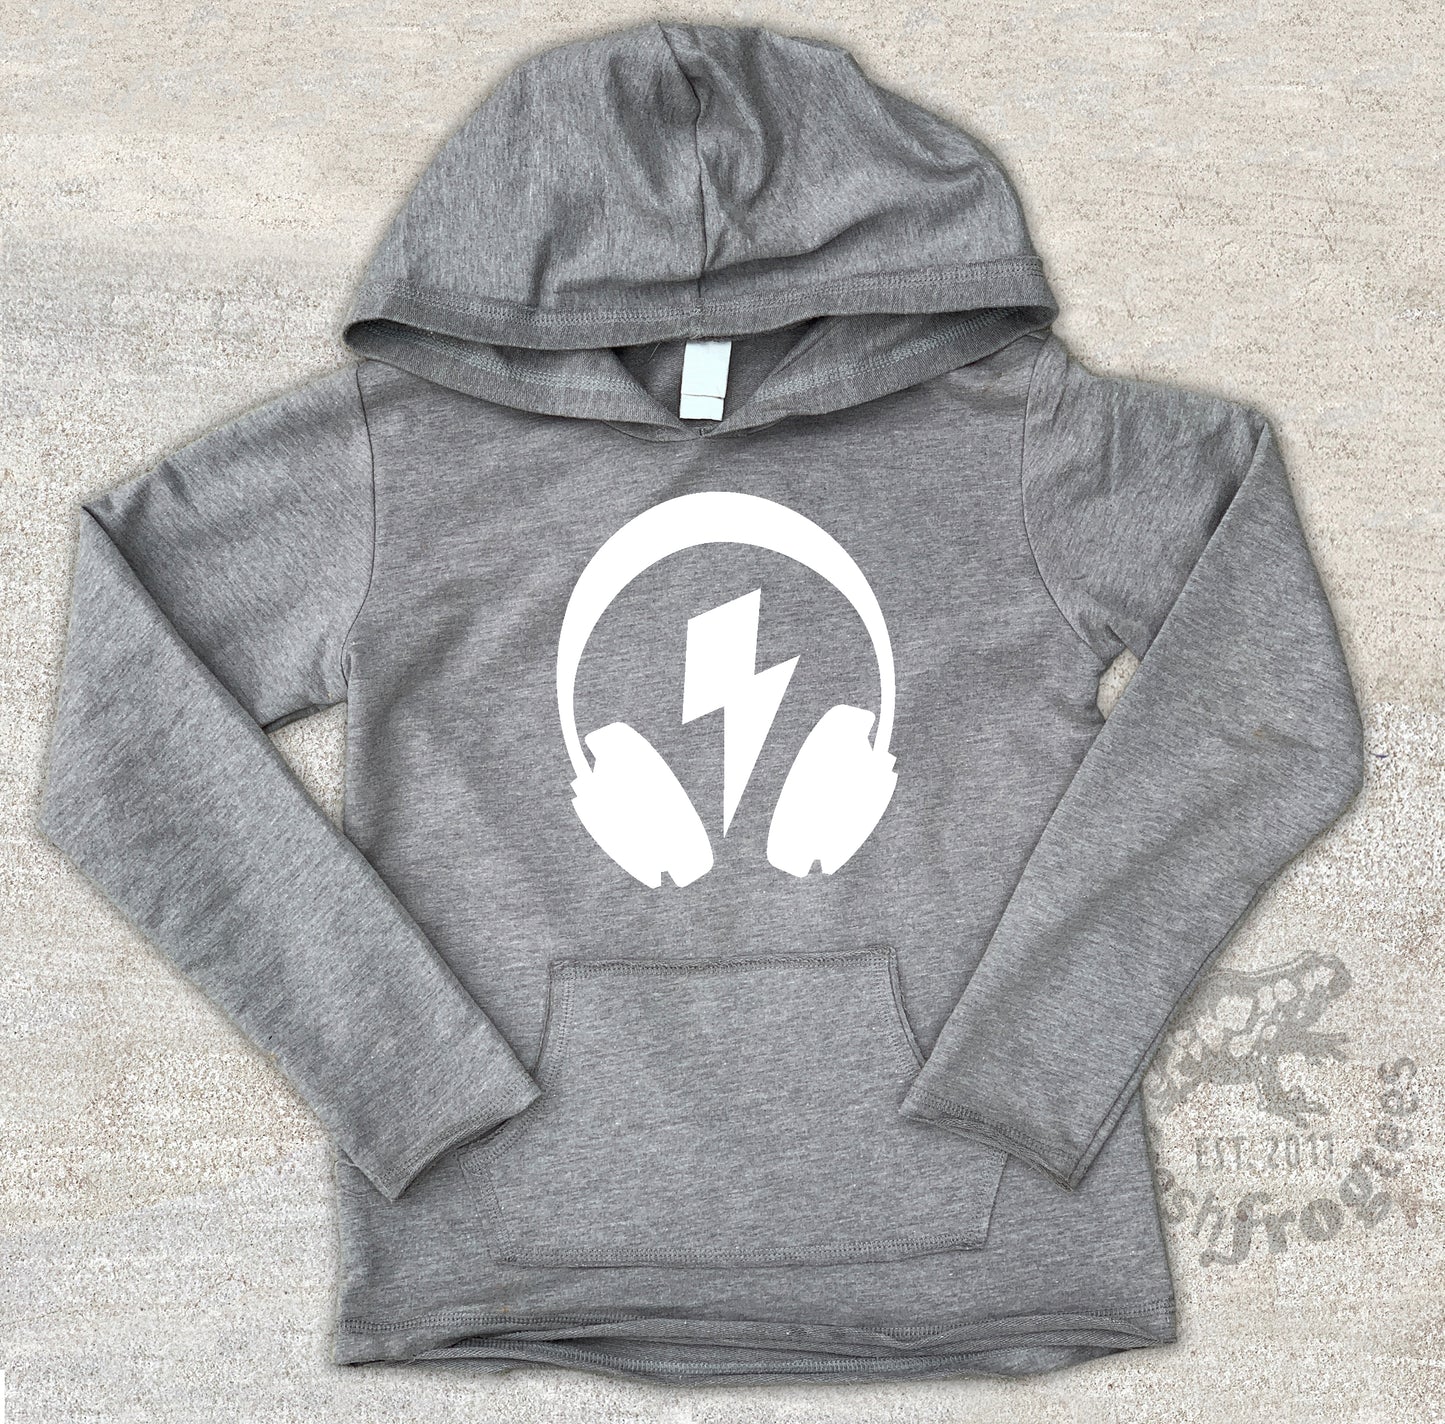 DJ Headphones with bolt Hoodie French Terry Long Sleeve shirt with pocket